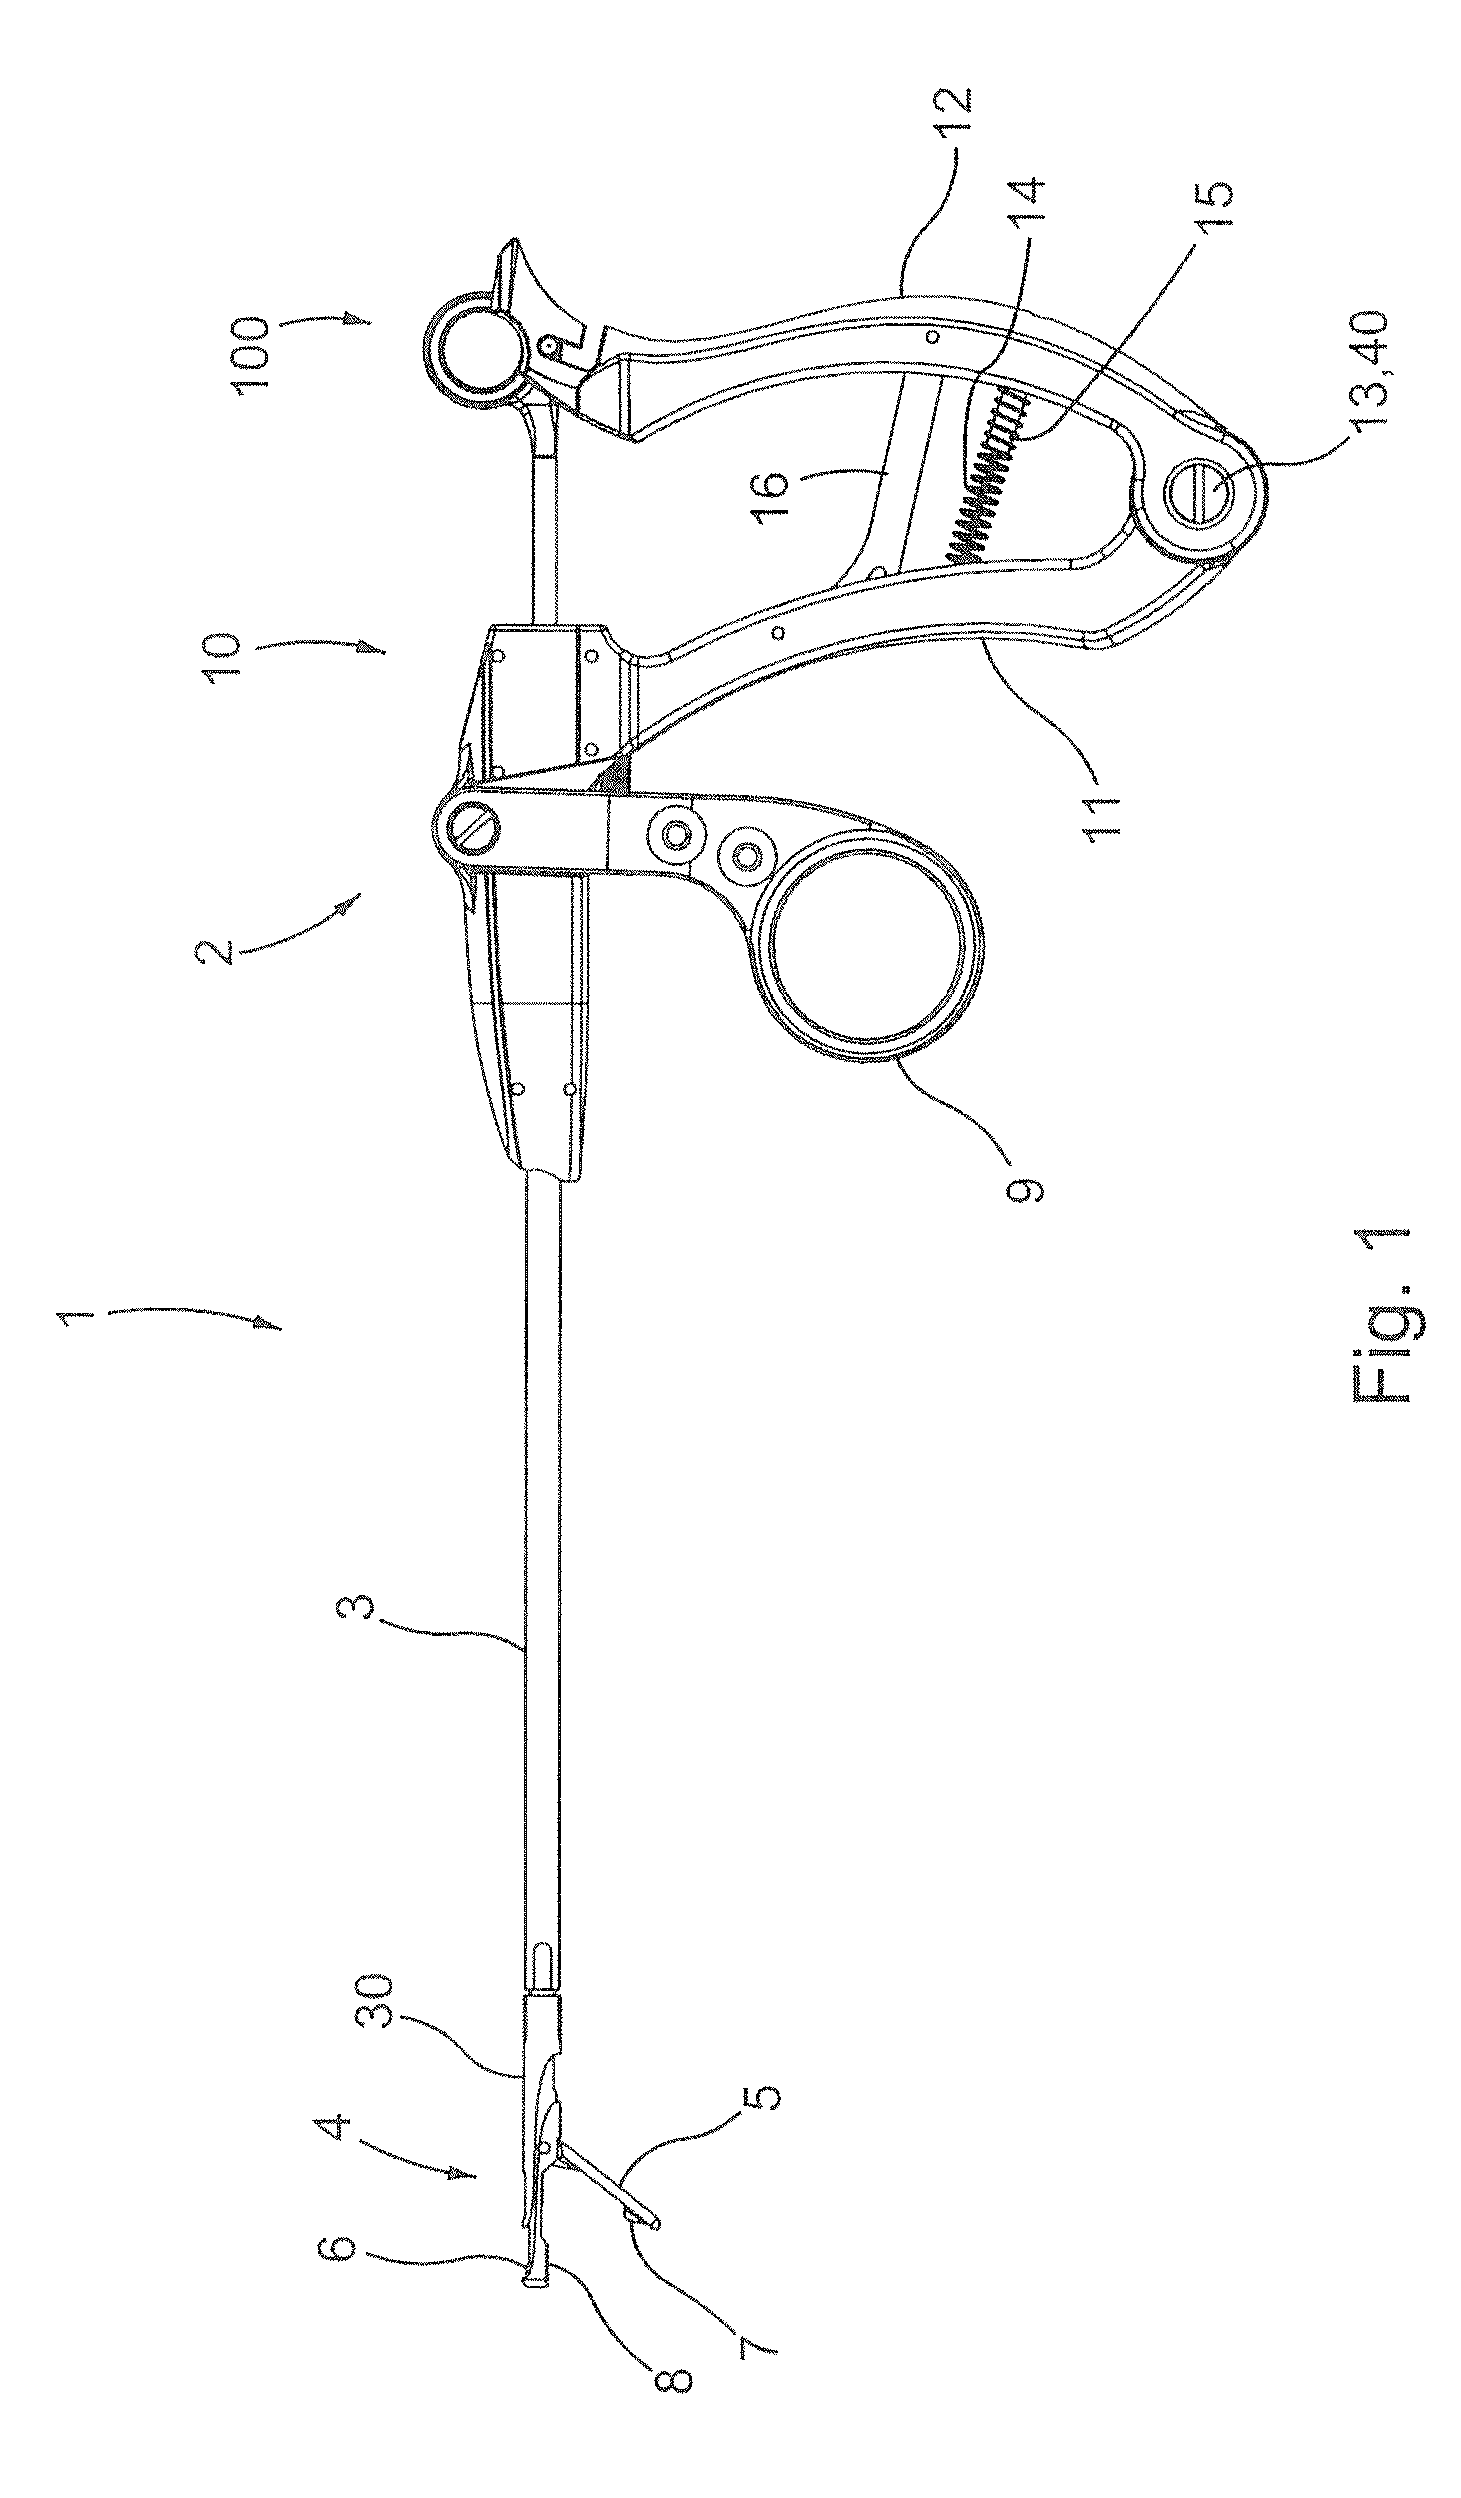 Suture passer device and suture needle